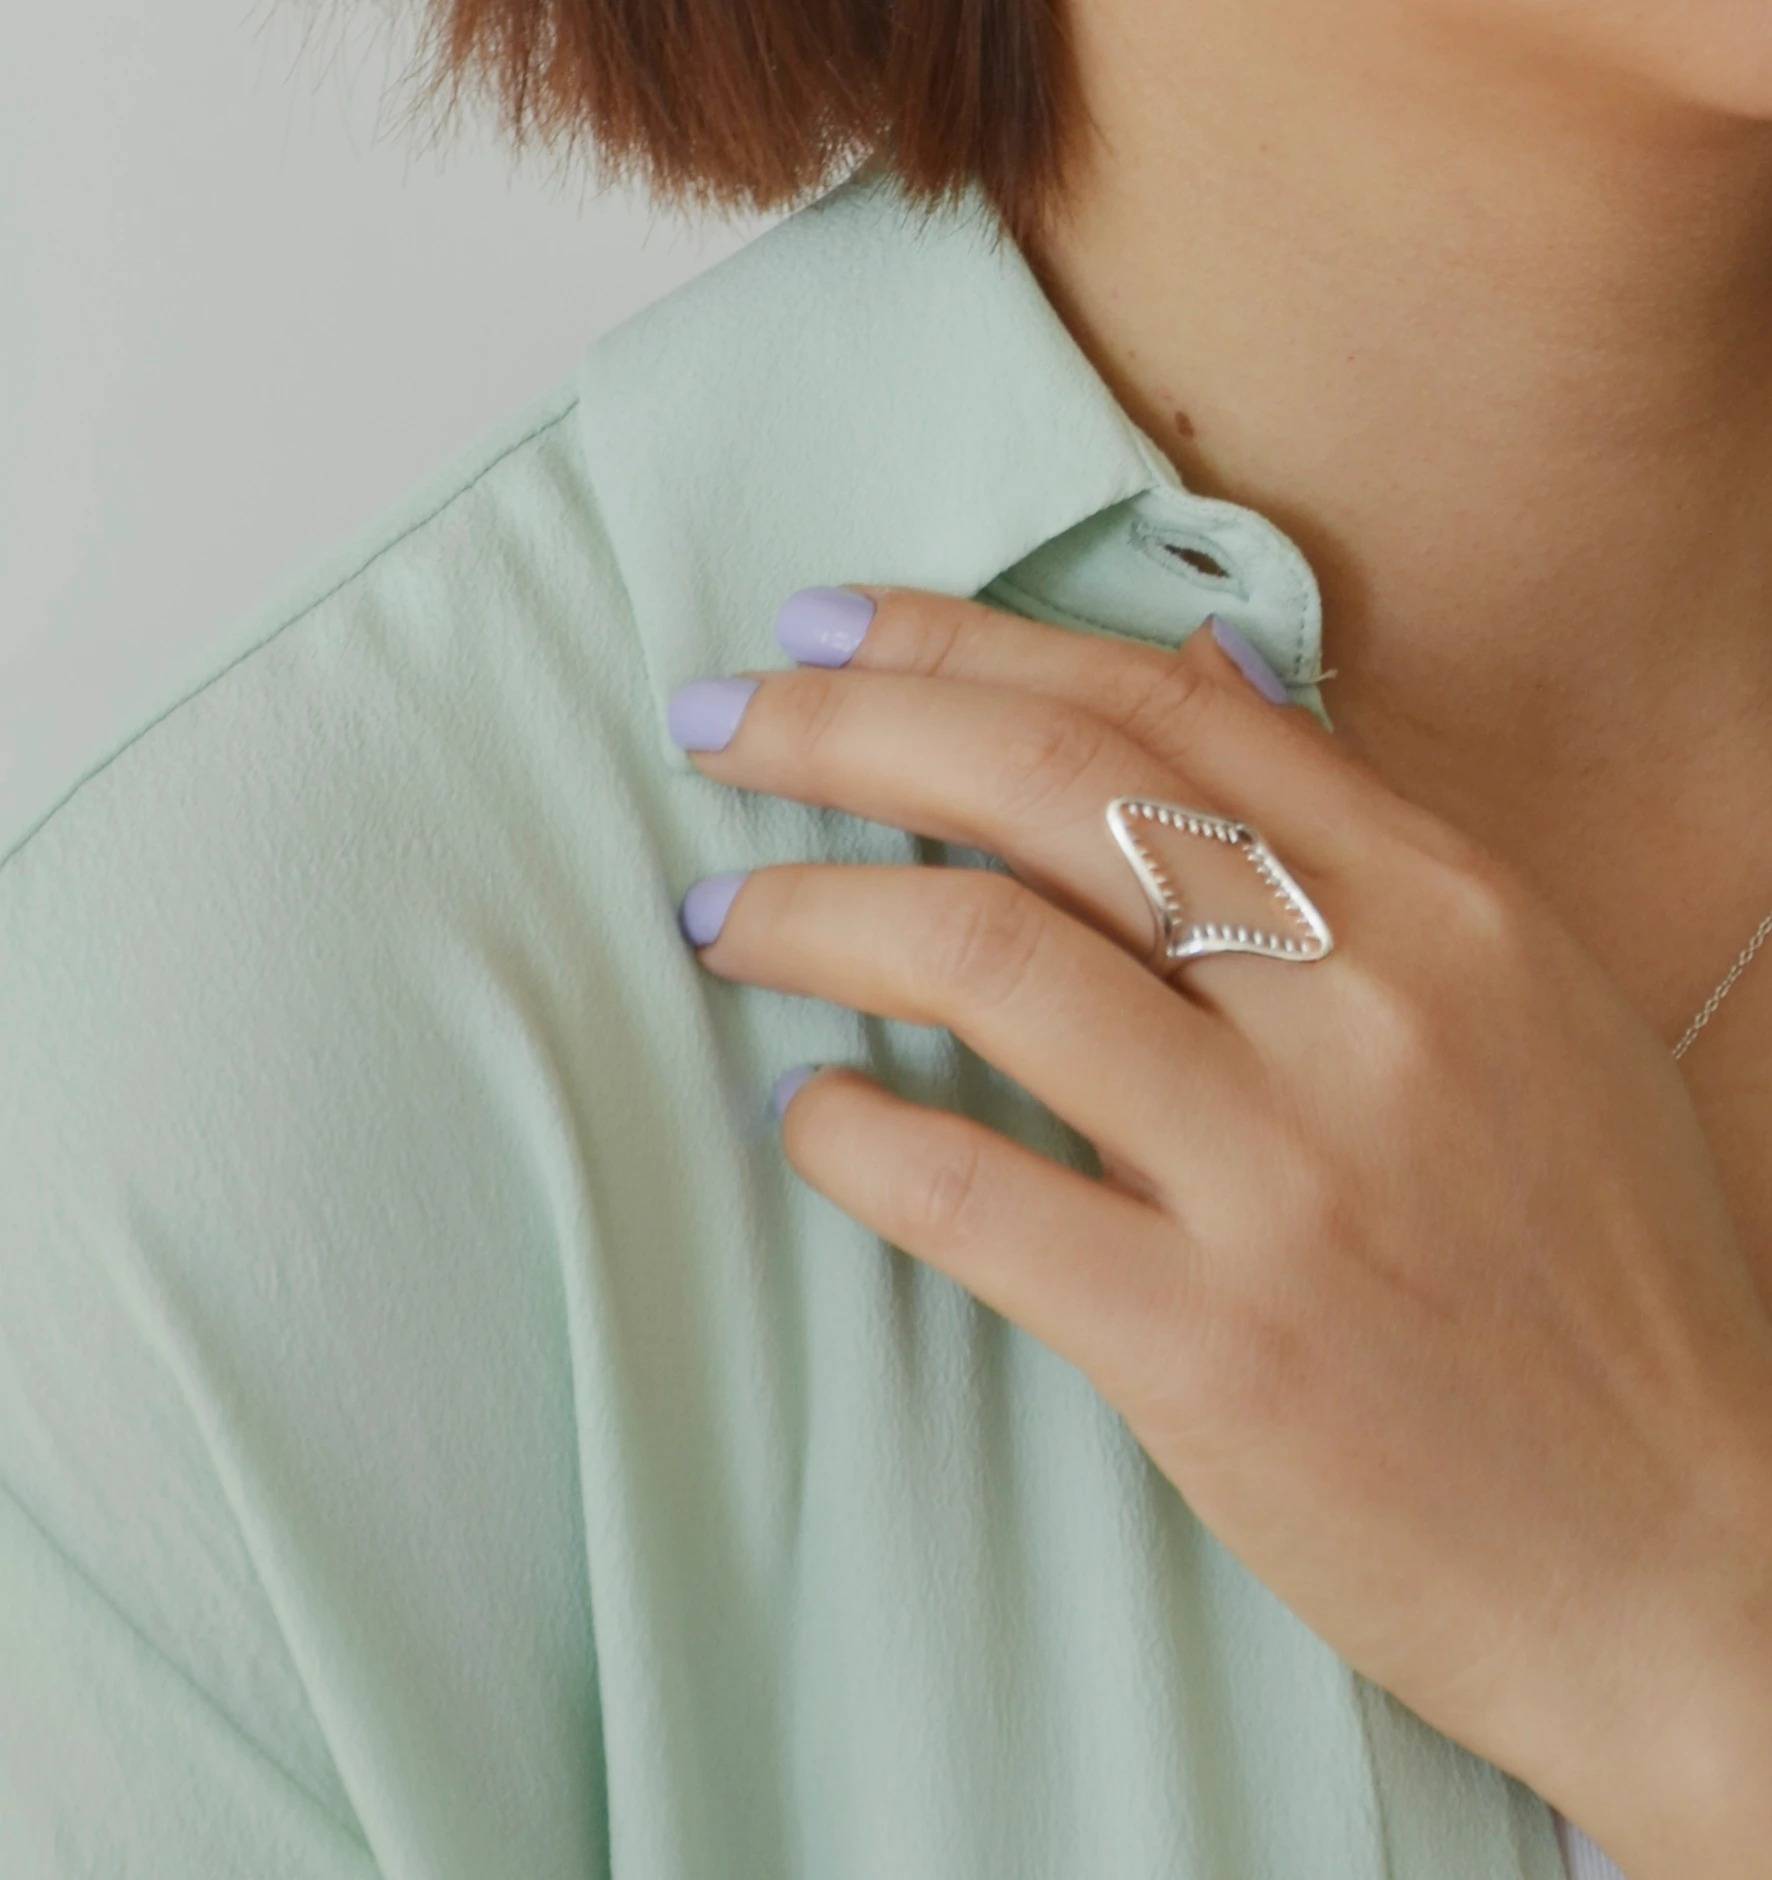 Joulala creates sustainable jewellery pieces made from recycled silver using 3D printing technique